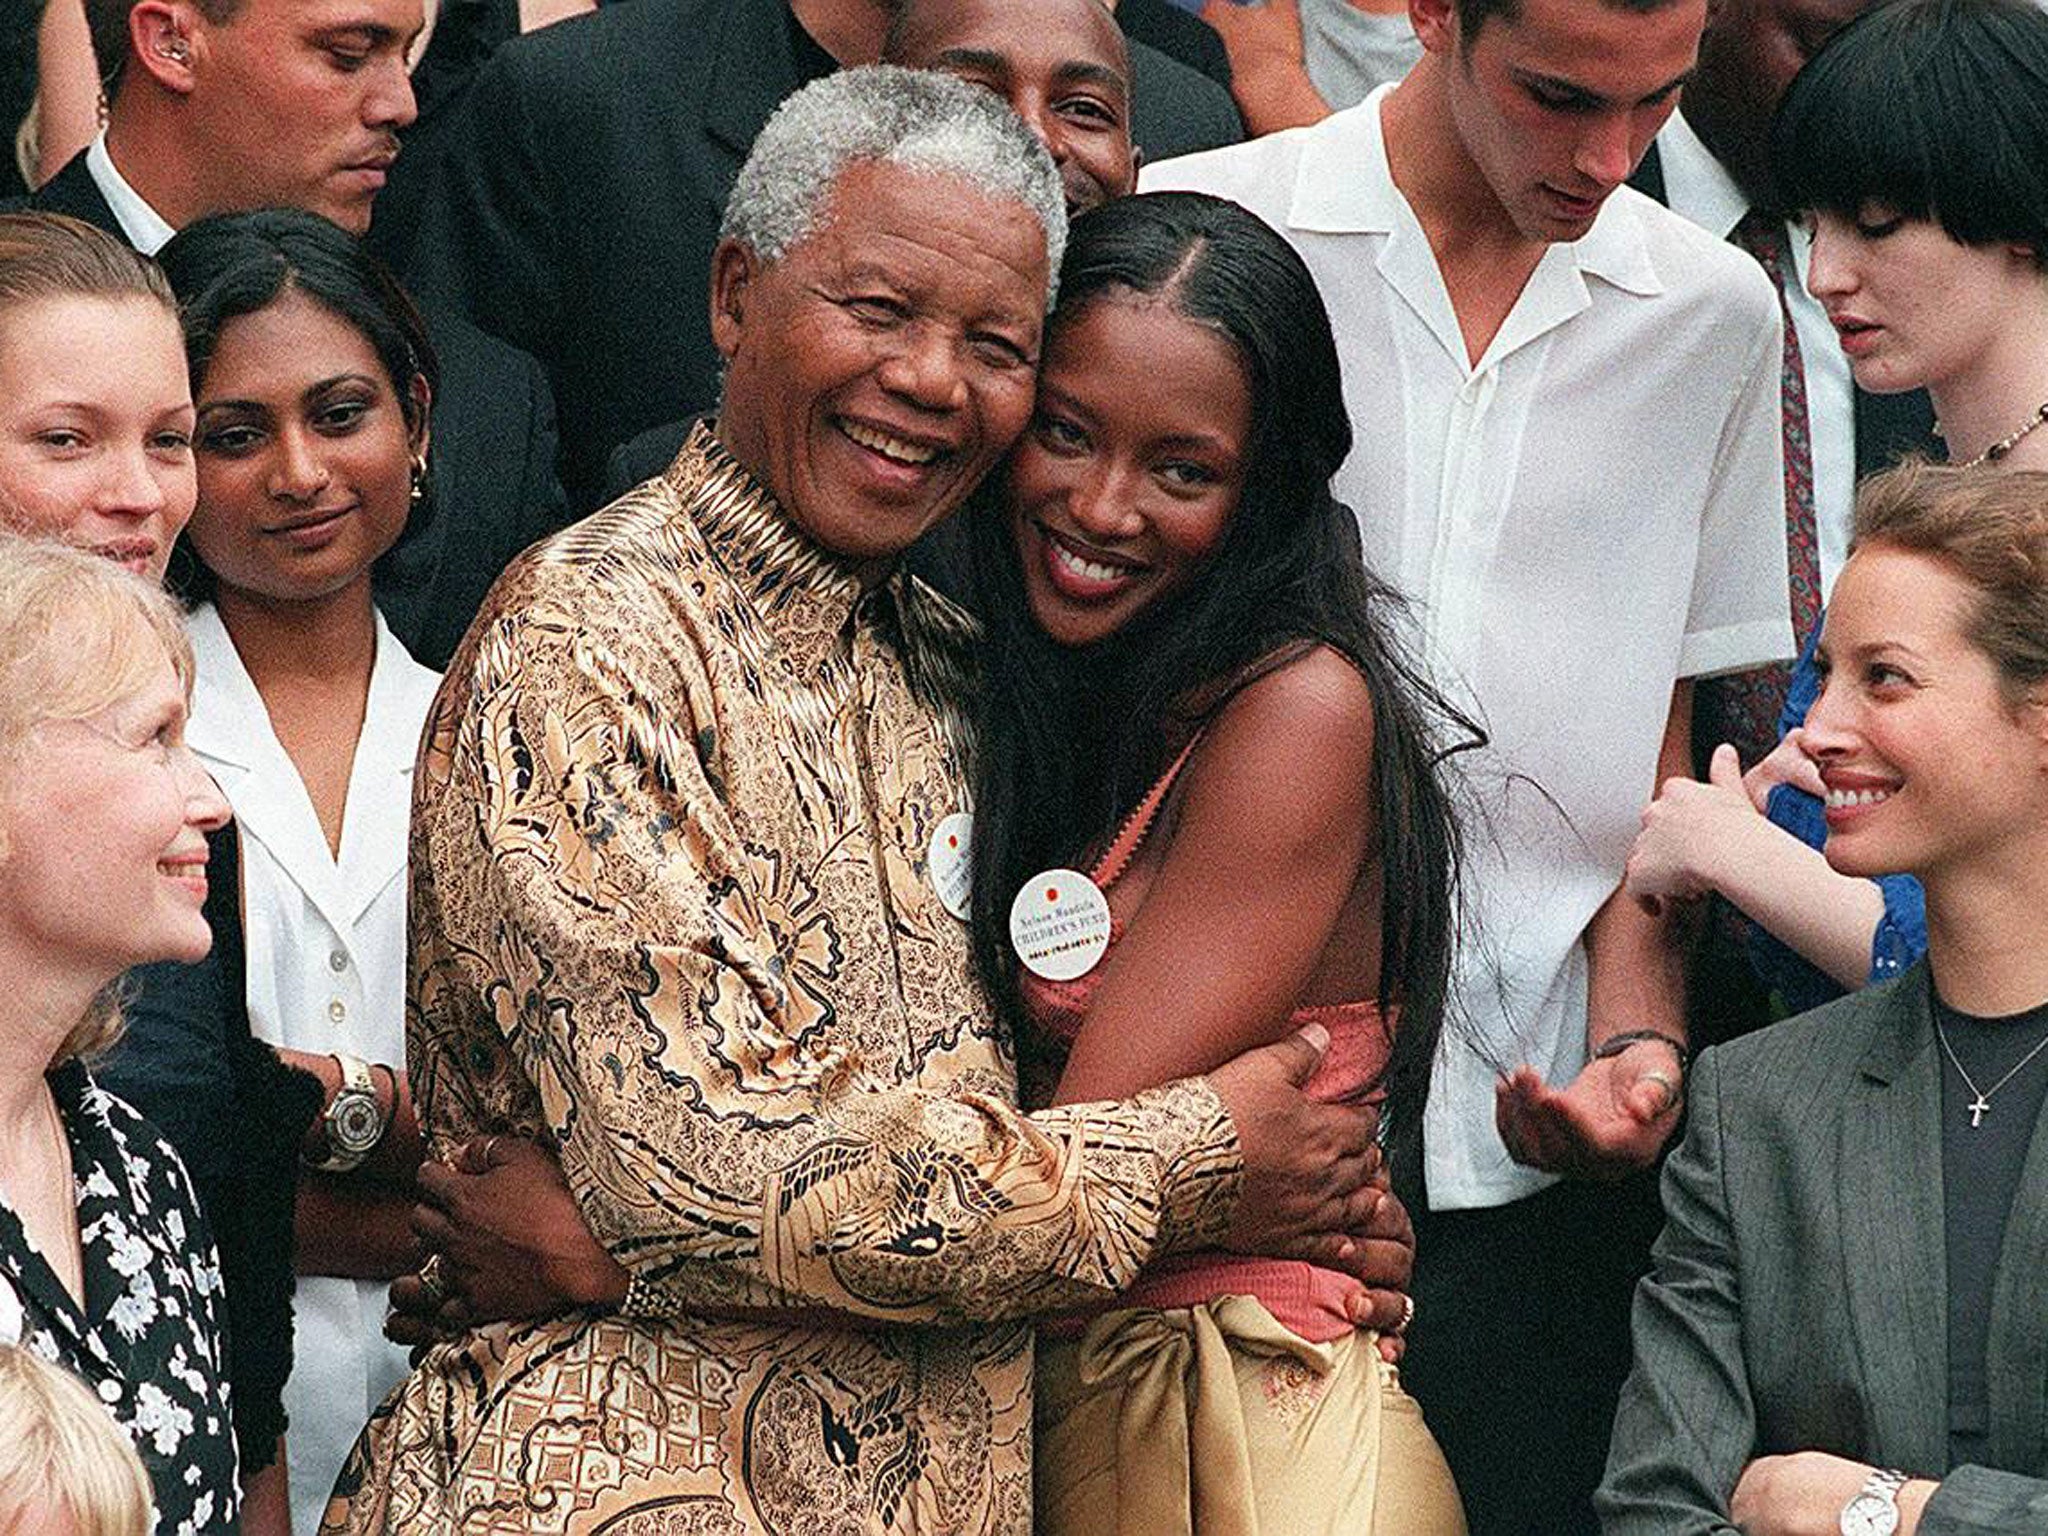 February 1998: Nelson Mandela (L) hugs British supermodel Naomi Campbell in front of American actress Mia Farrow, British model Kate Moss (second from left) and model Christy Turlington